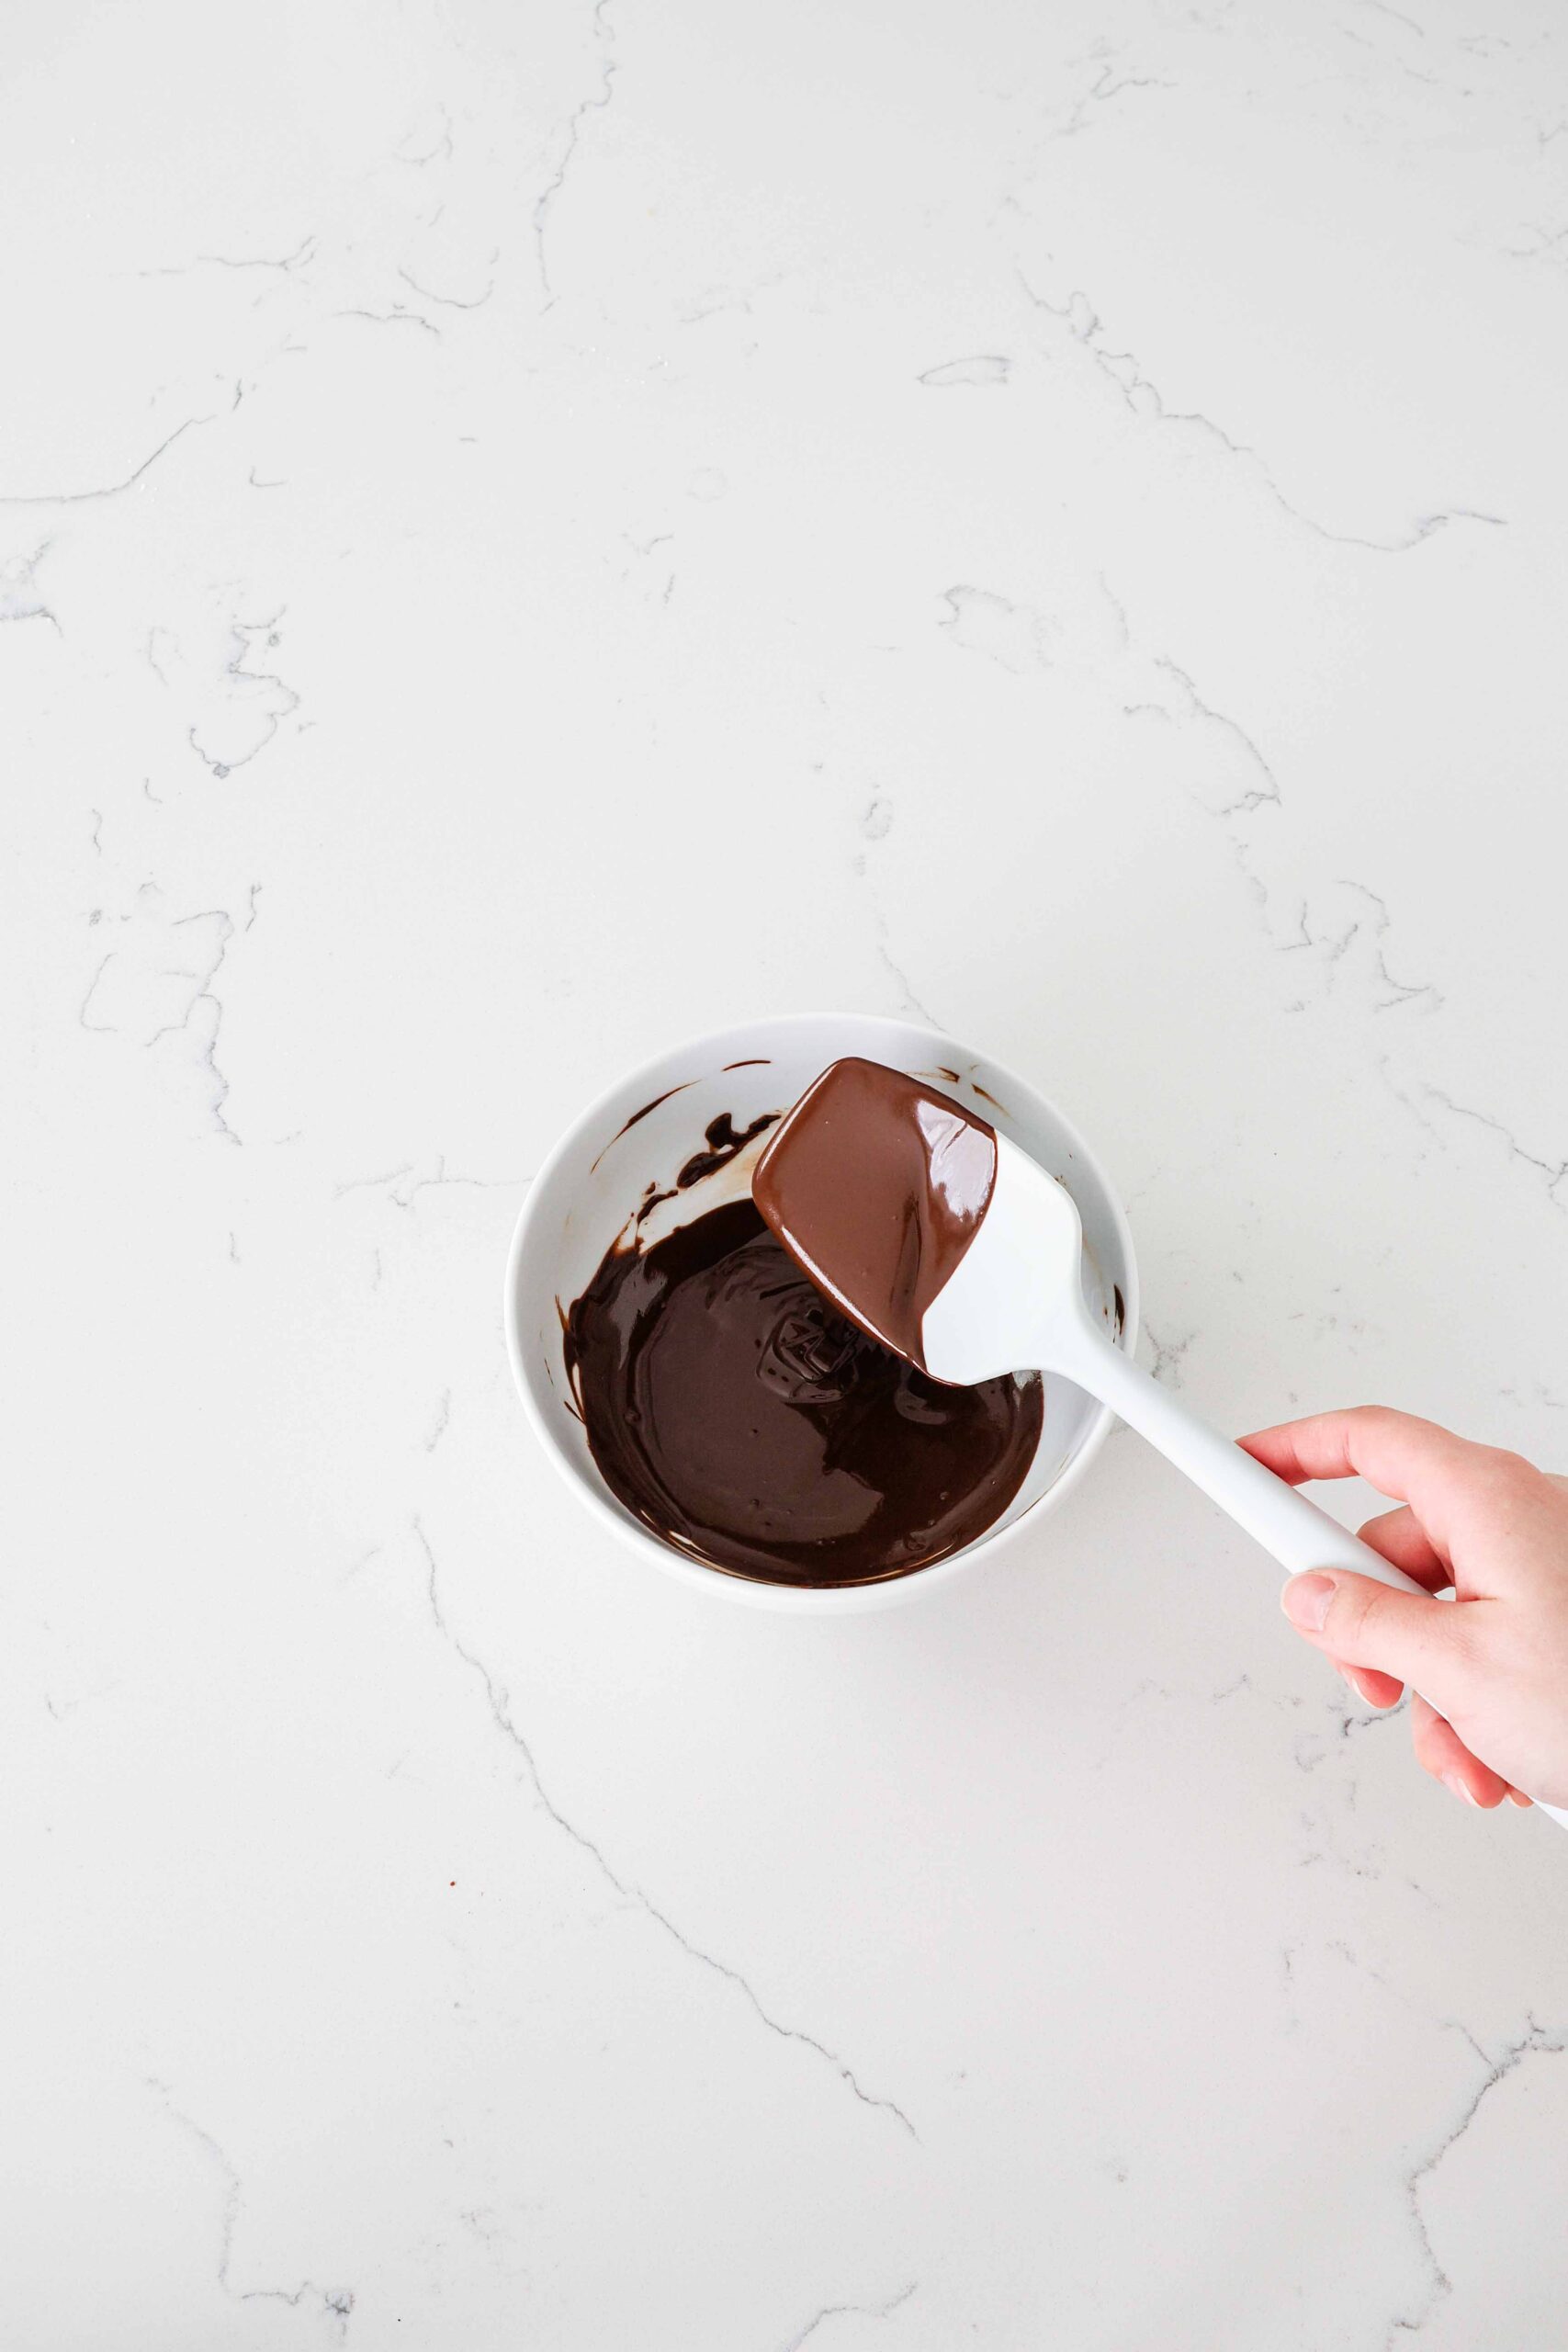 A spatula with glossy, melted chocolate running off it into a bowl.